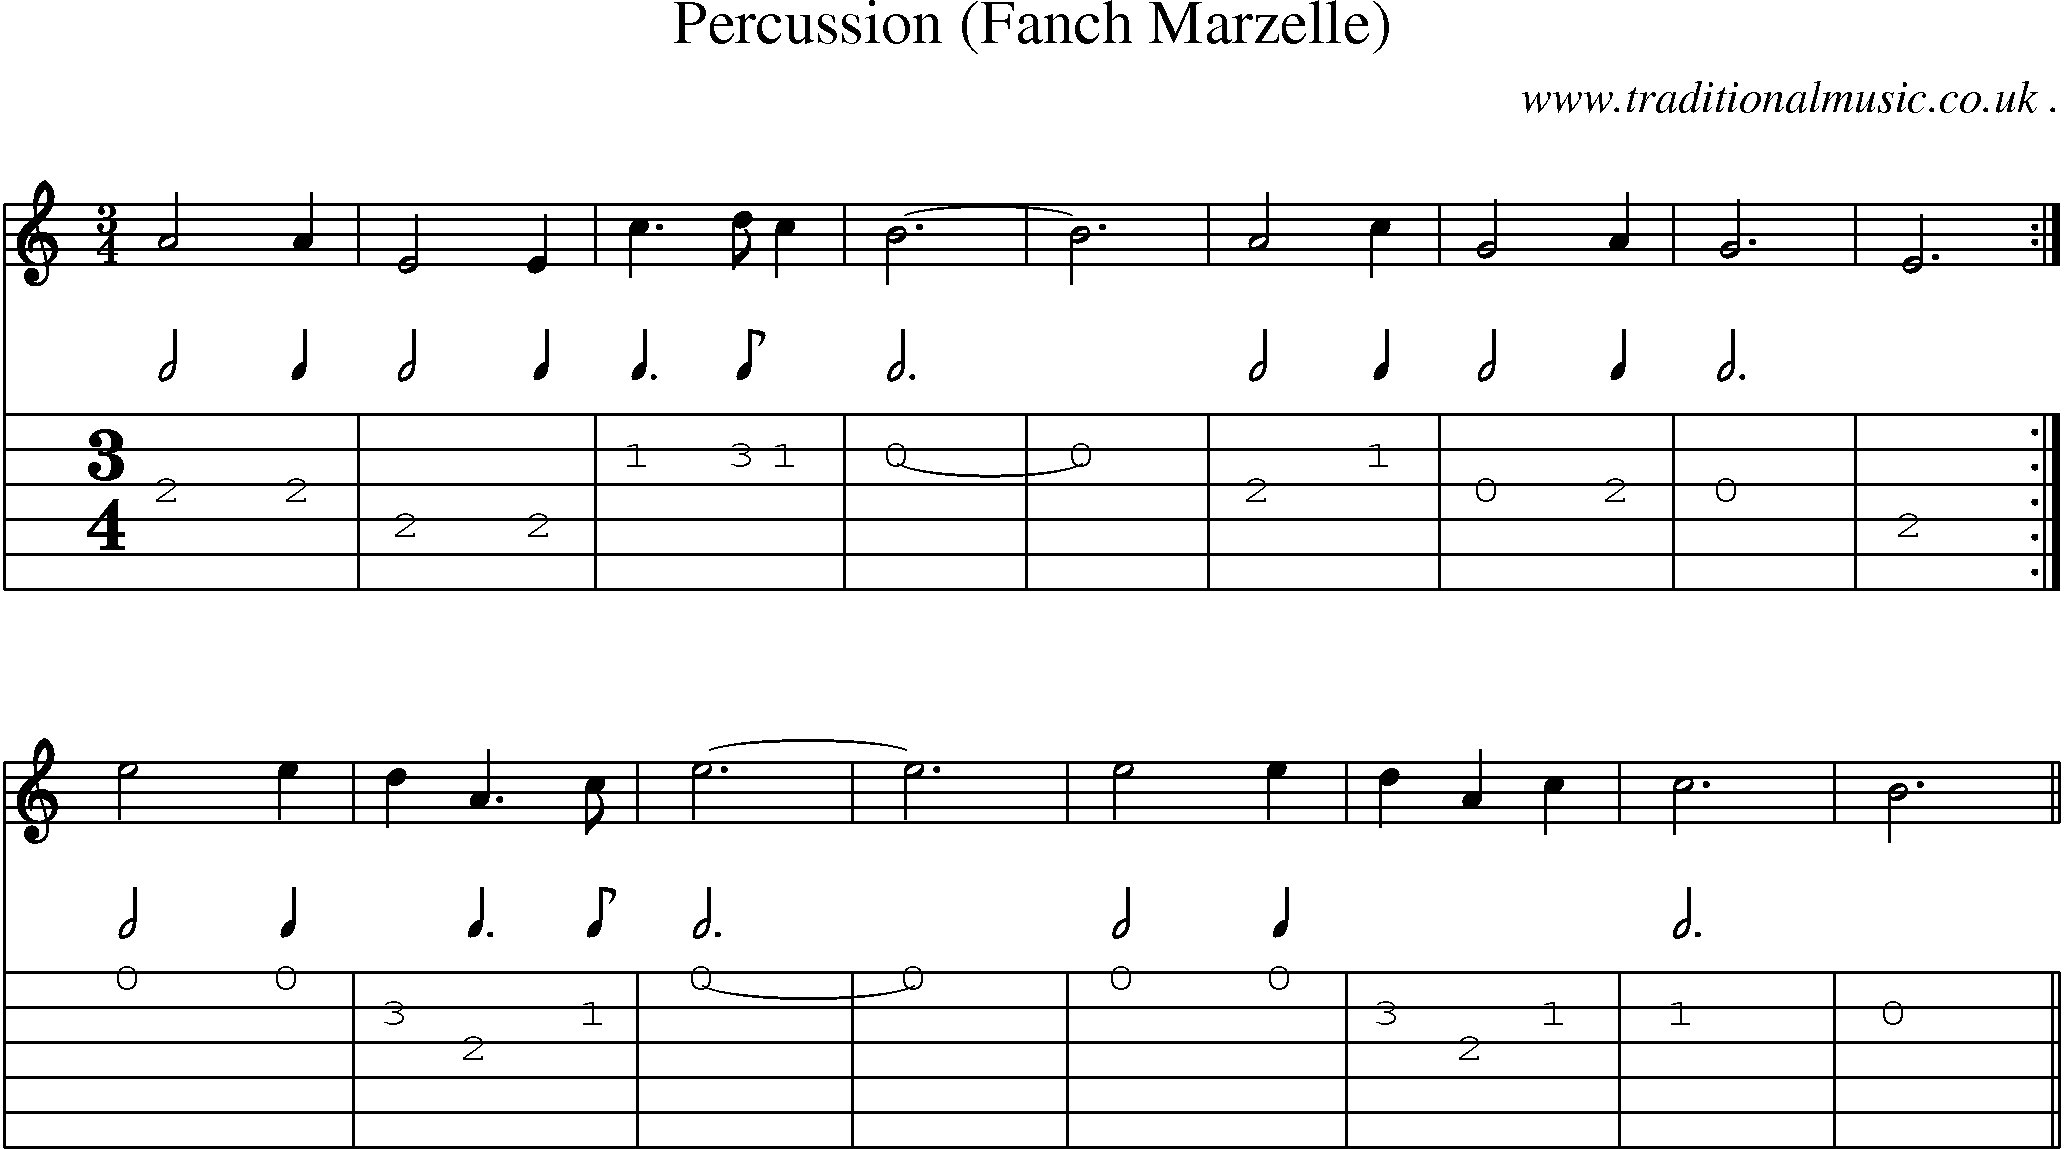 Sheet-Music and Guitar Tabs for Percussion (fanch Marzelle)